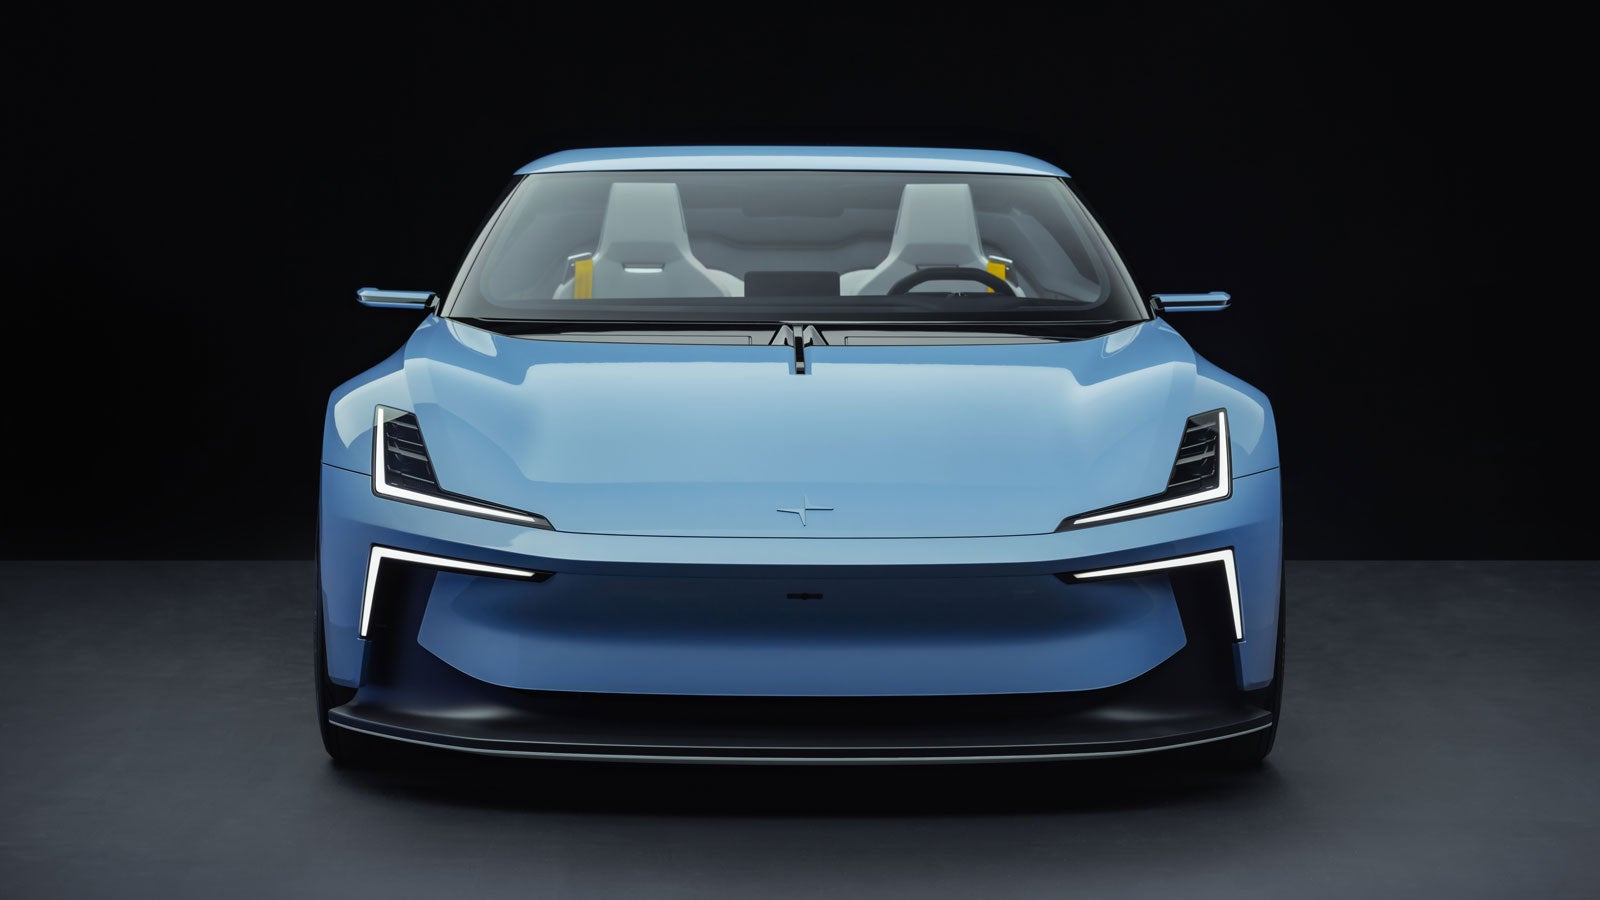 Polestar Will Build an Electric Convertible Sports Car in 2026